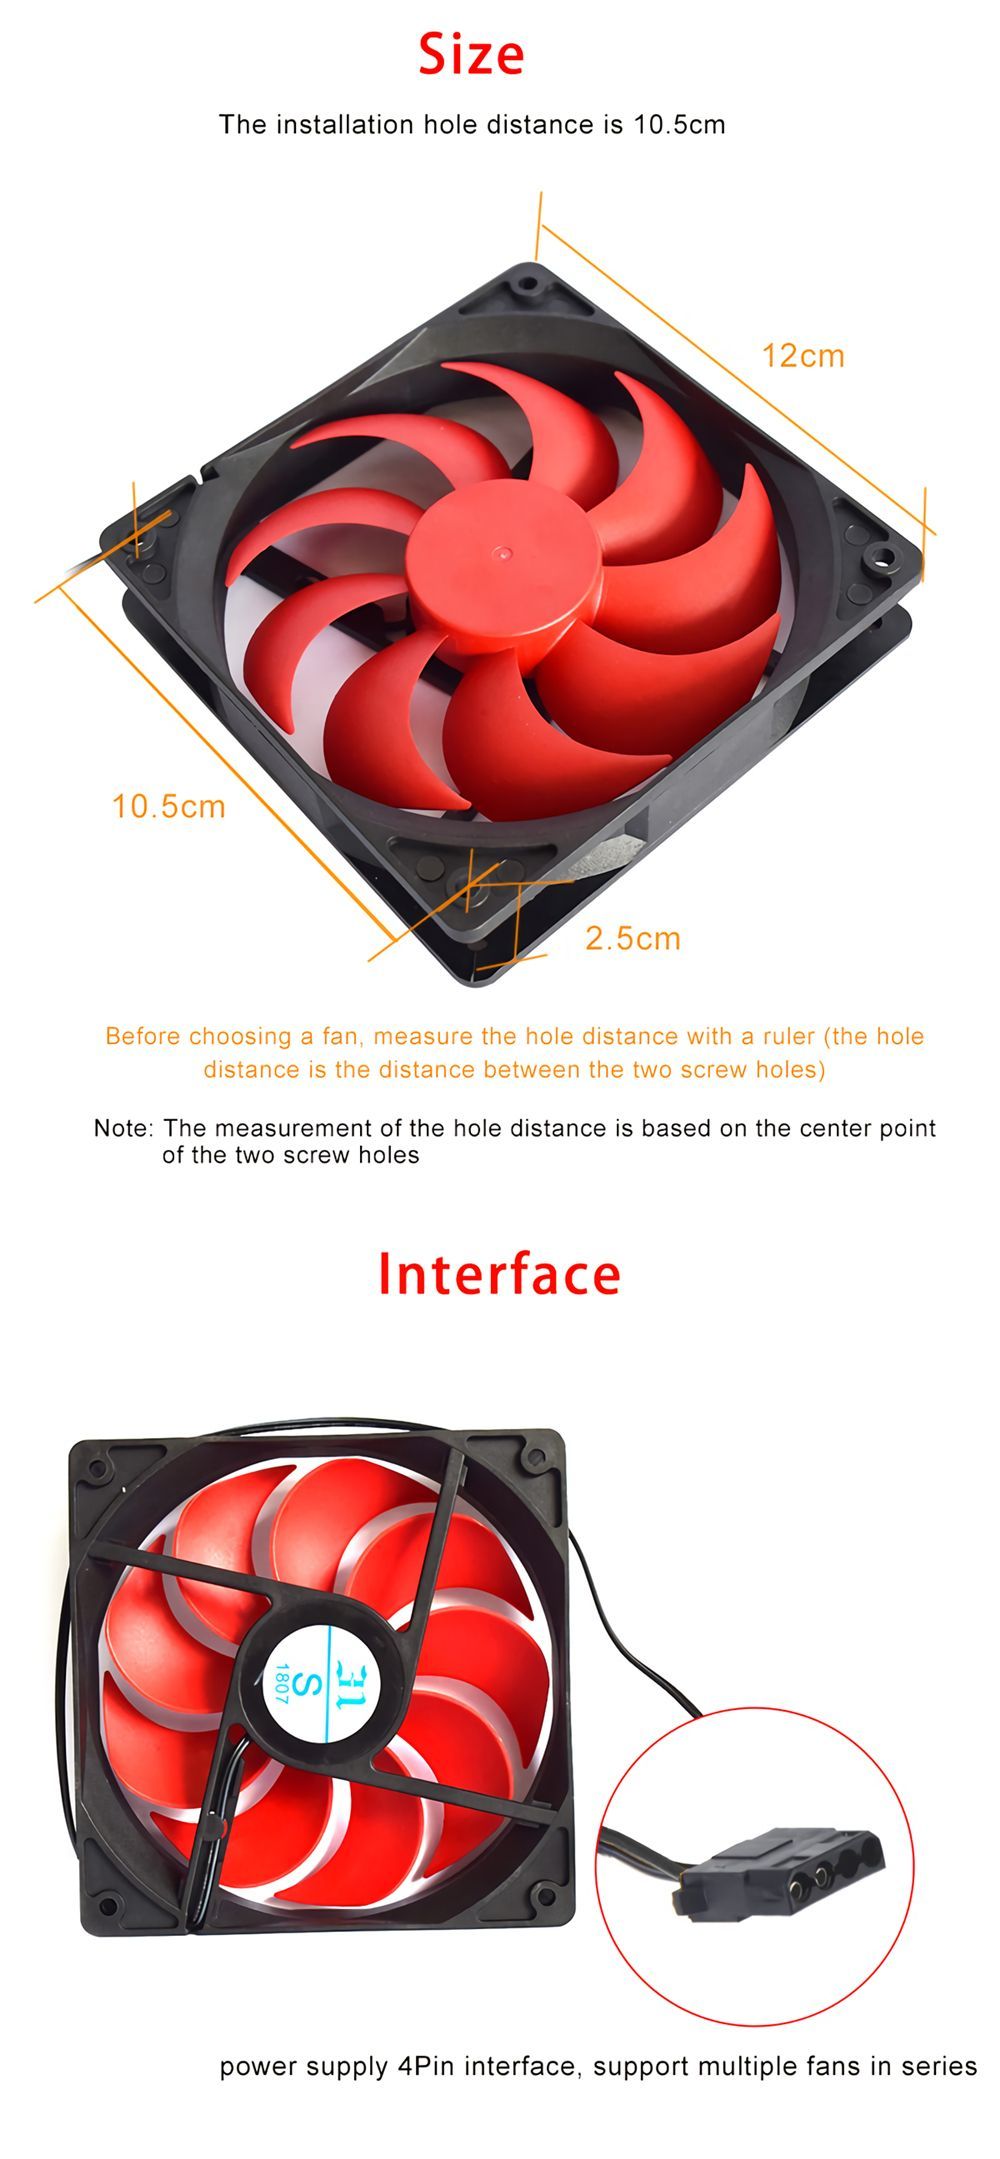 Zero-Degree-Family-12cm-Chassis-Cooling-Fan-Quiet-3Pin-4Pin-Interface-D-type-Power-Connector-PC-Cool-1692853